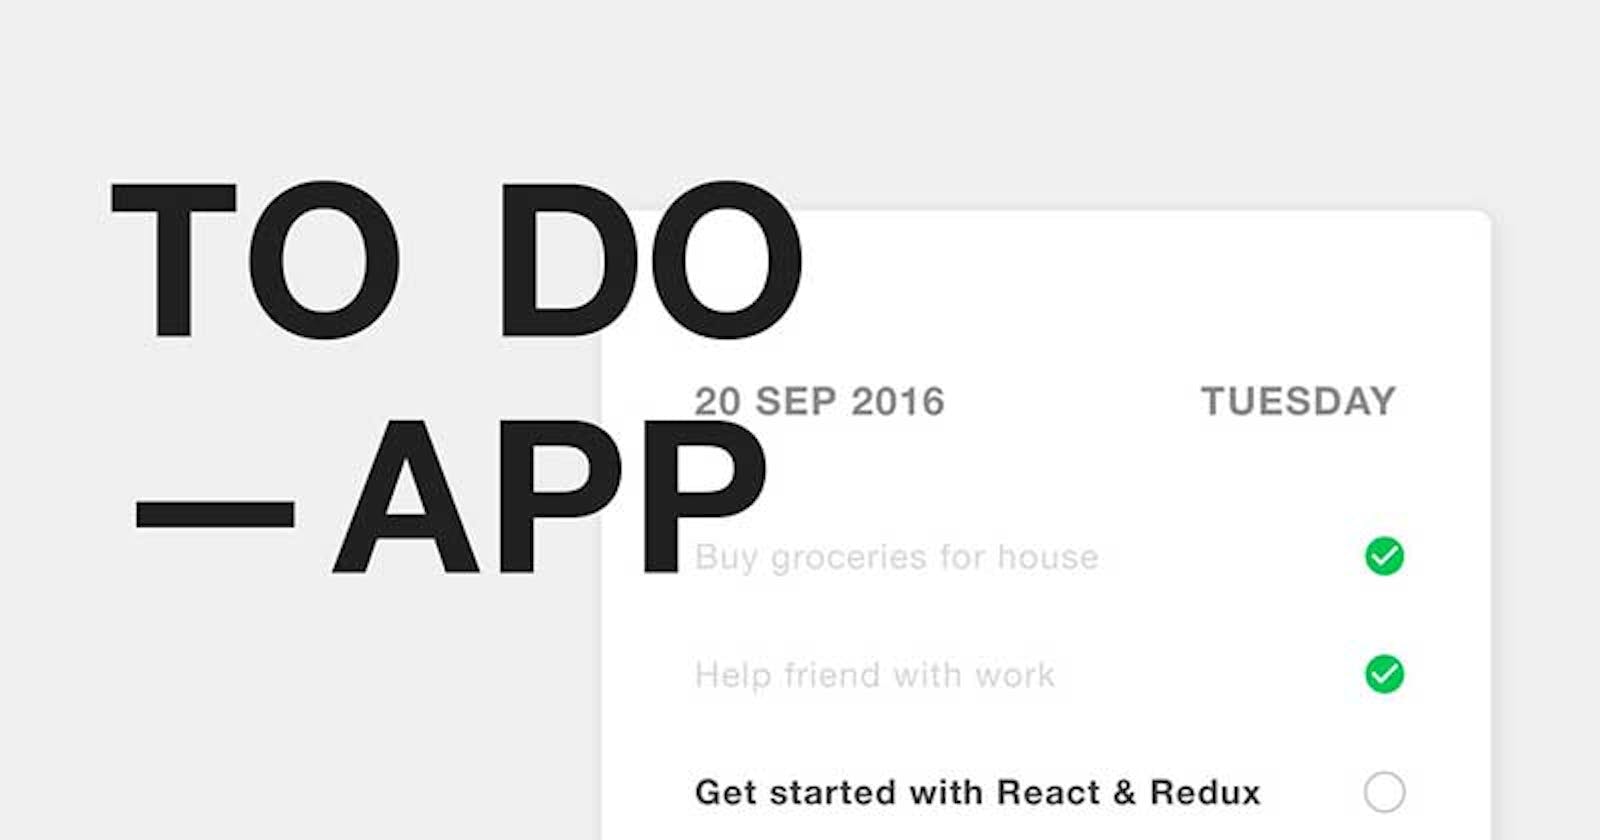 Getting started with ES6 and React — by building a Minimal Todo App